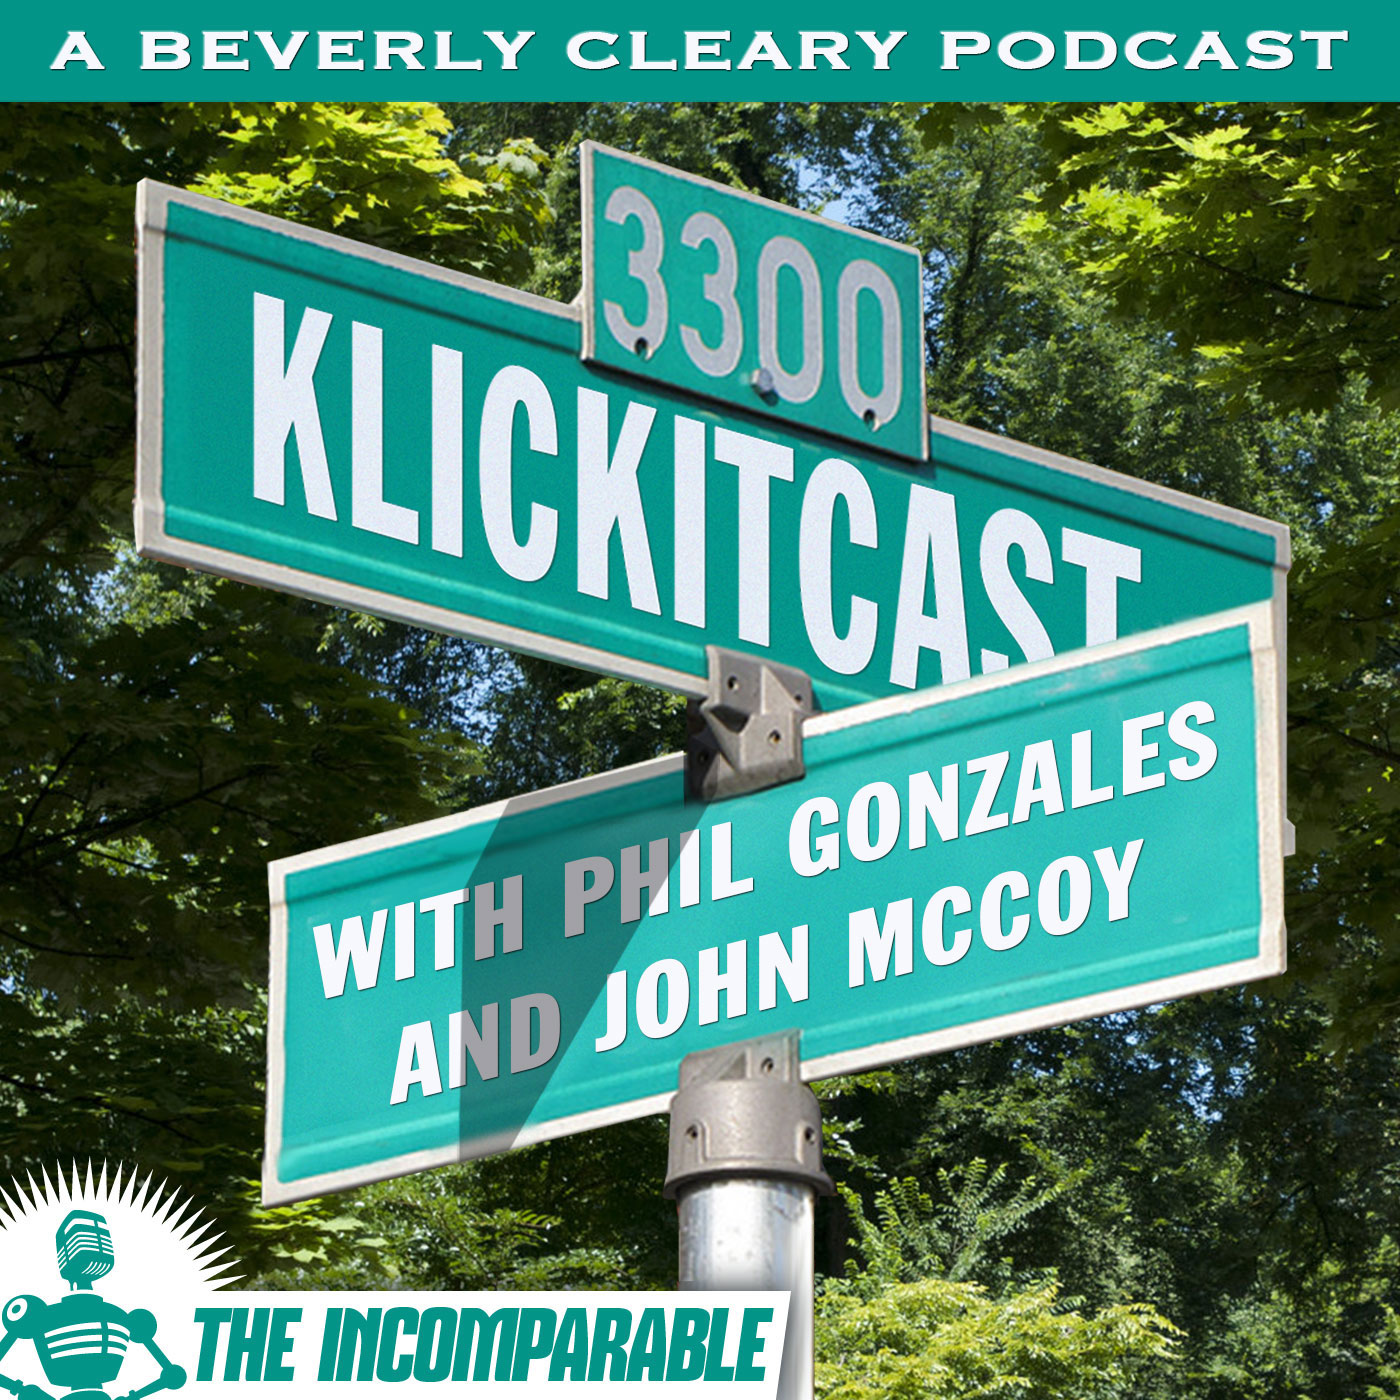 Klickitcast - A Beverly Cleary Podcast